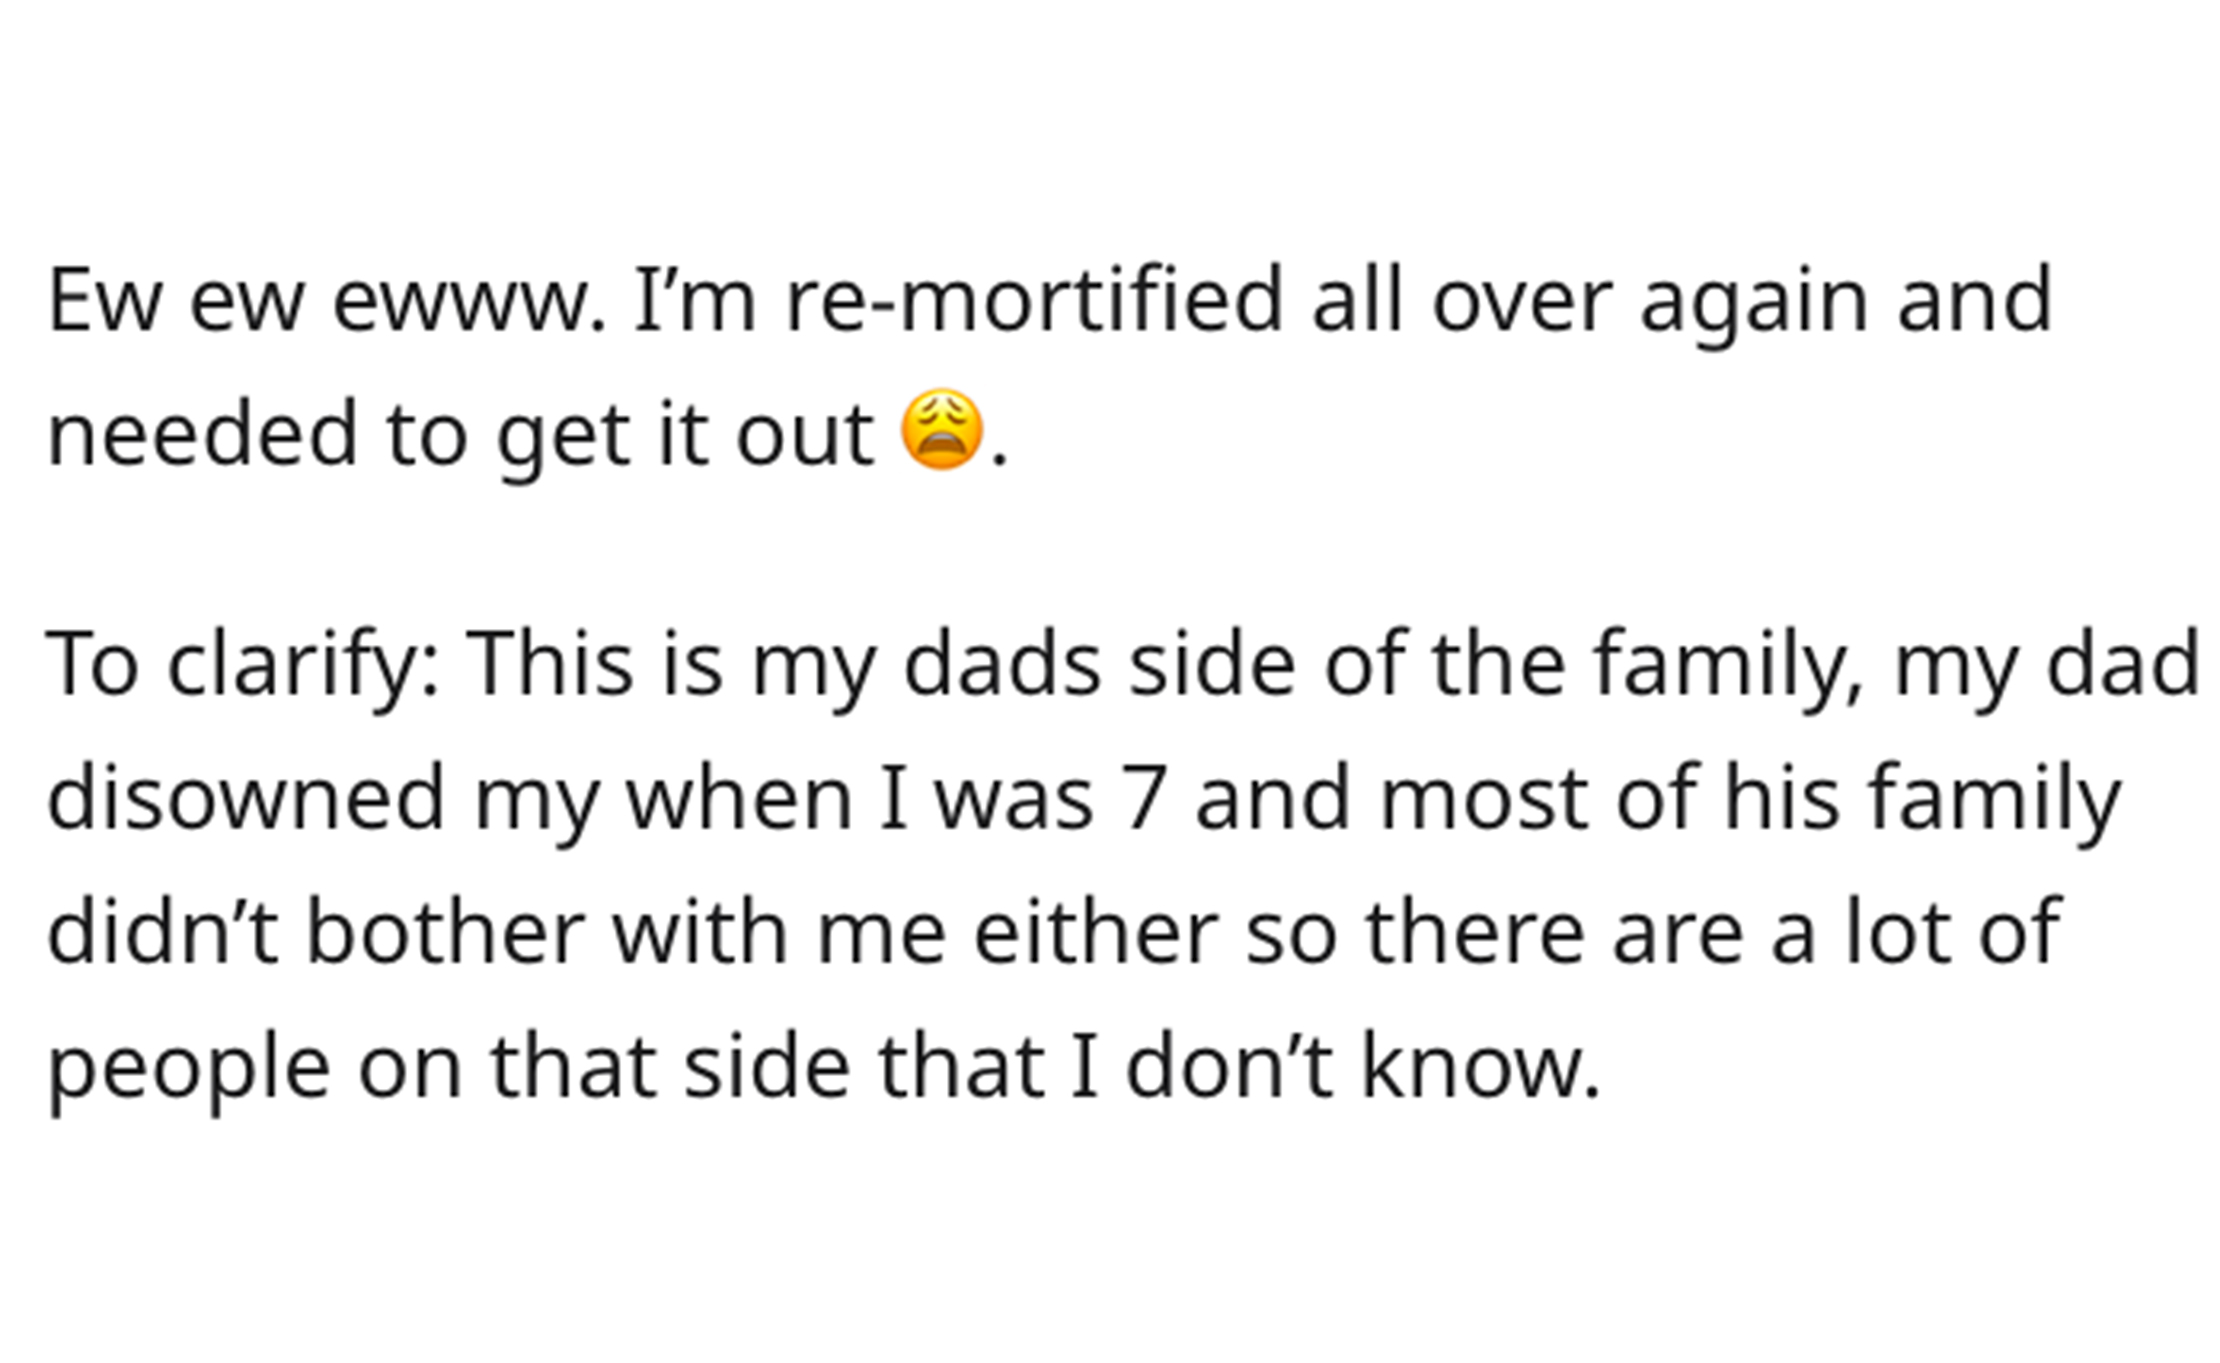 Cousins Sleep Together Reddit - document - Ew ew ewww. I'm remortified all over again and needed to get it out To clarify This is my dads side of the family, my dad disowned my when I was 7 and most of his family didn't bother with me either so there are 